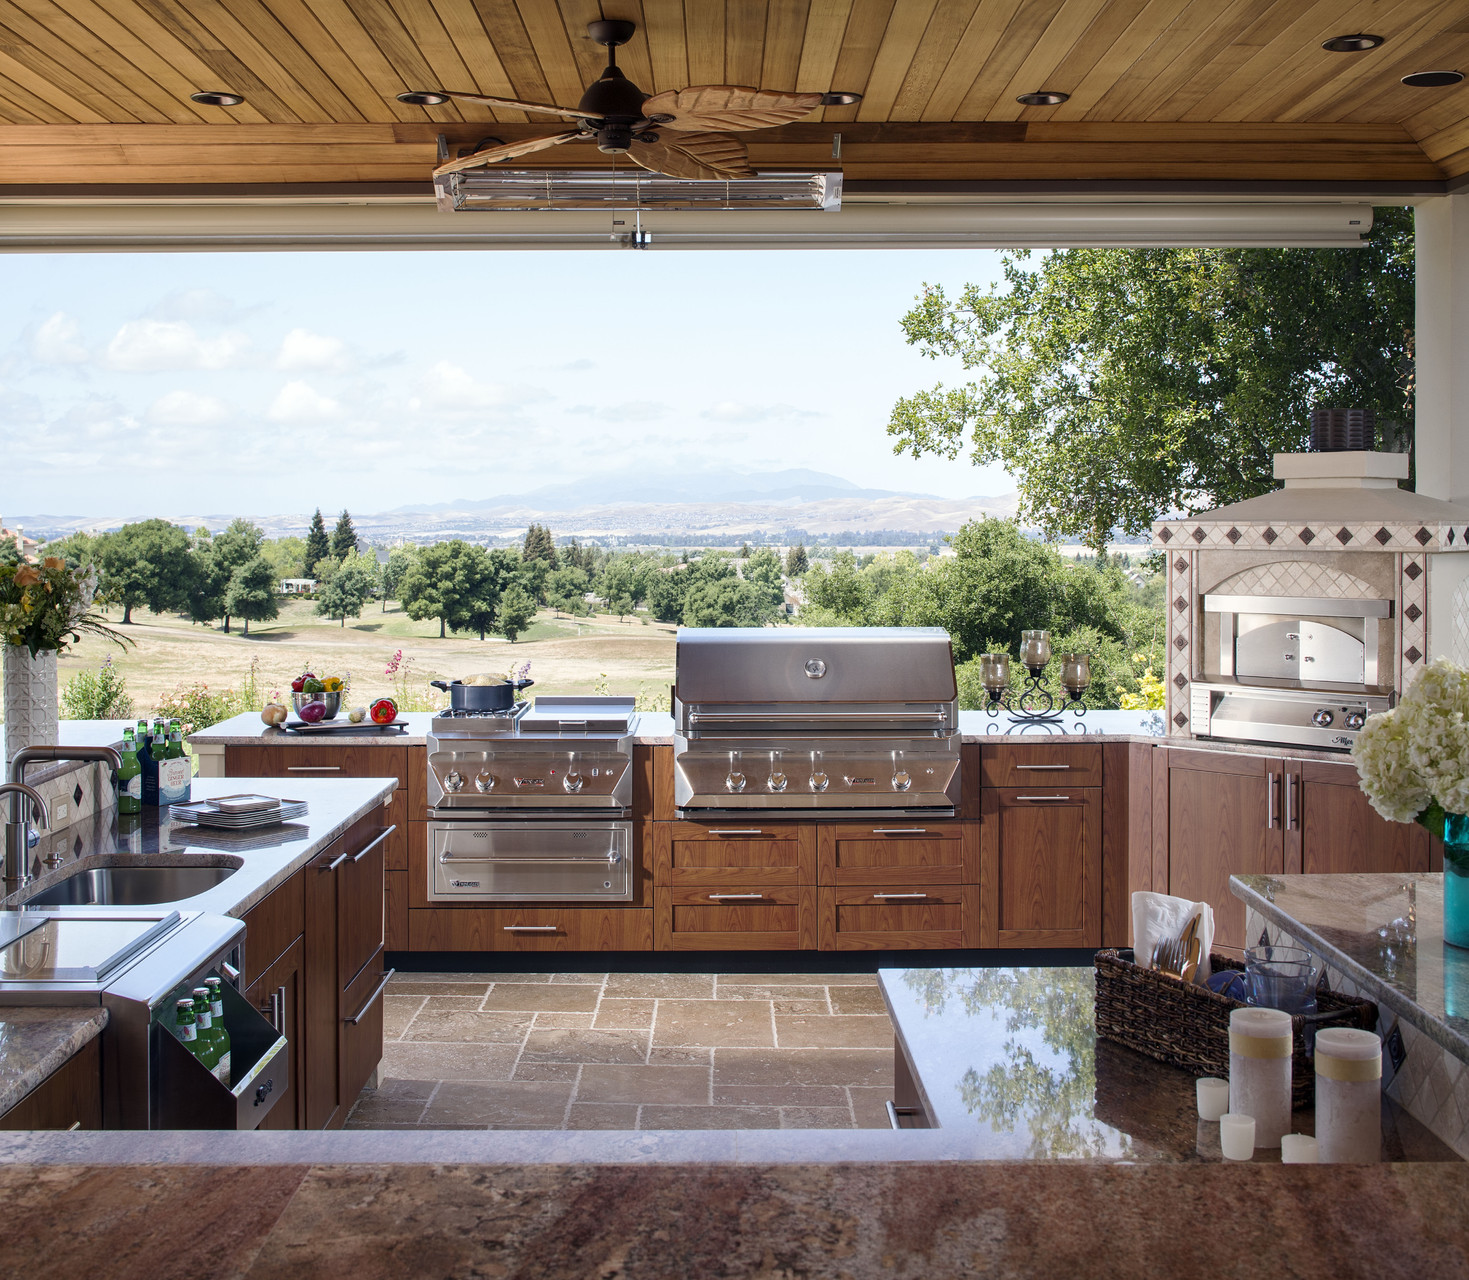 How To Make Your Outdoor Kitchen Areas Work